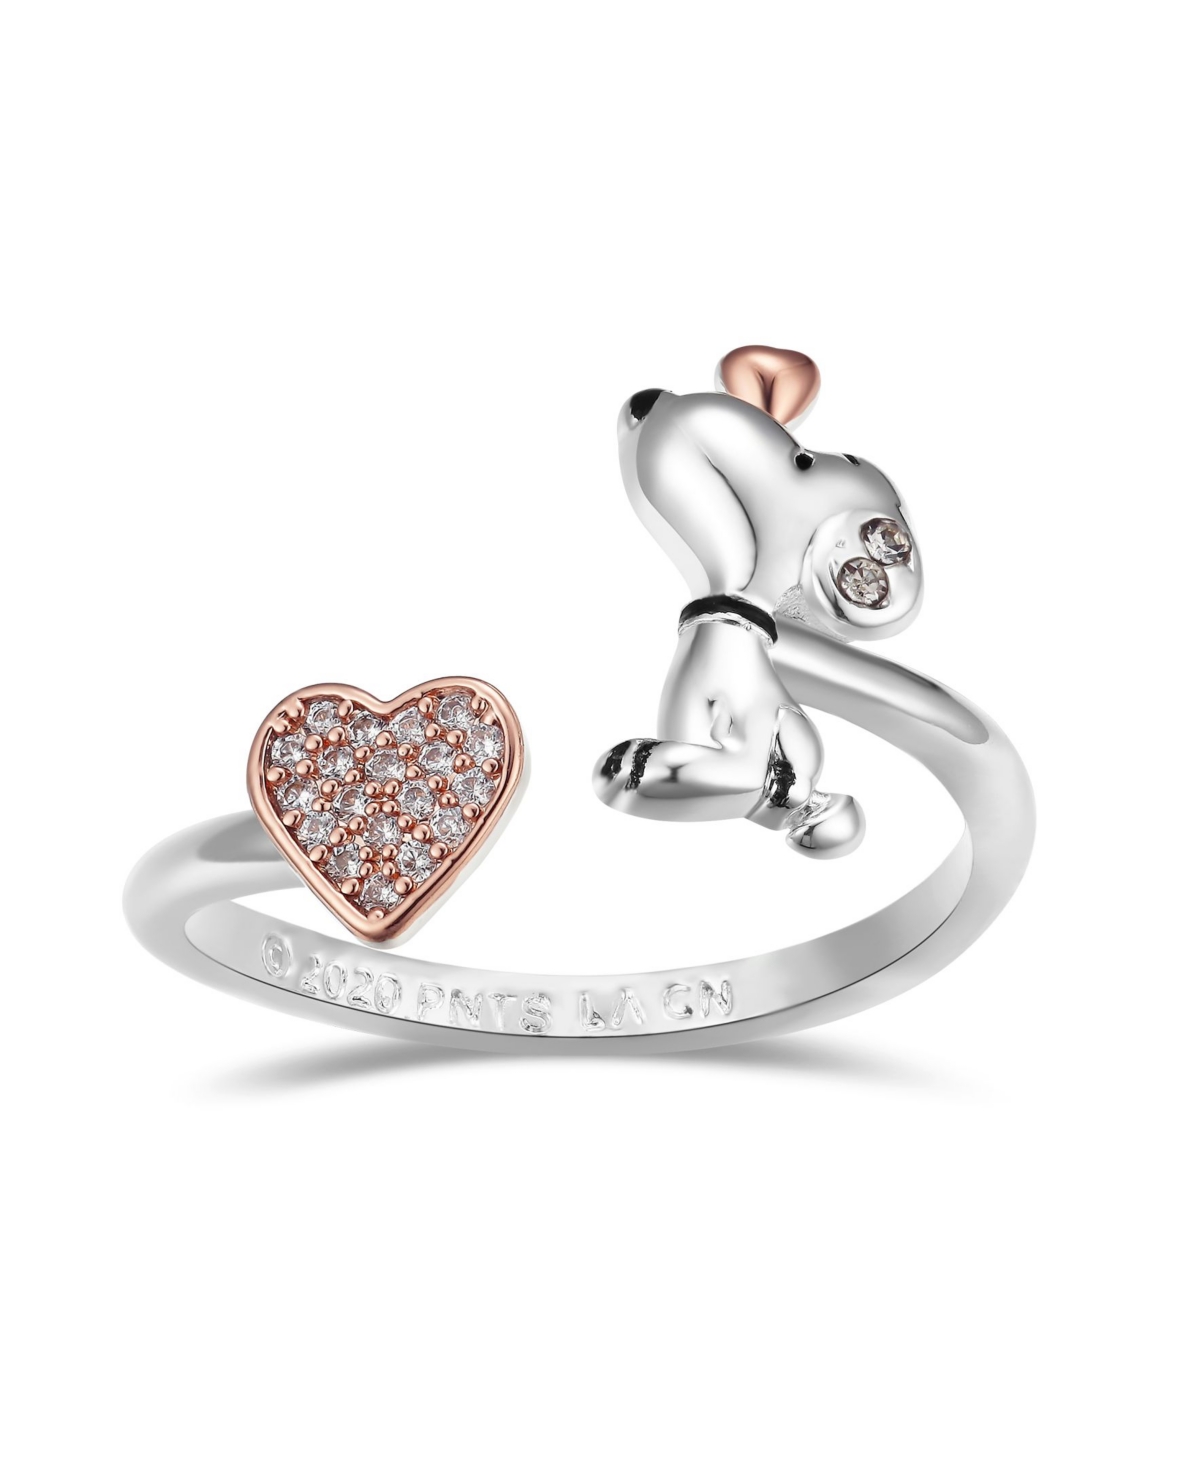 Snoopy and Pave Crystal Heart Bypass Ring - Two-Tone Rose Gold Plated